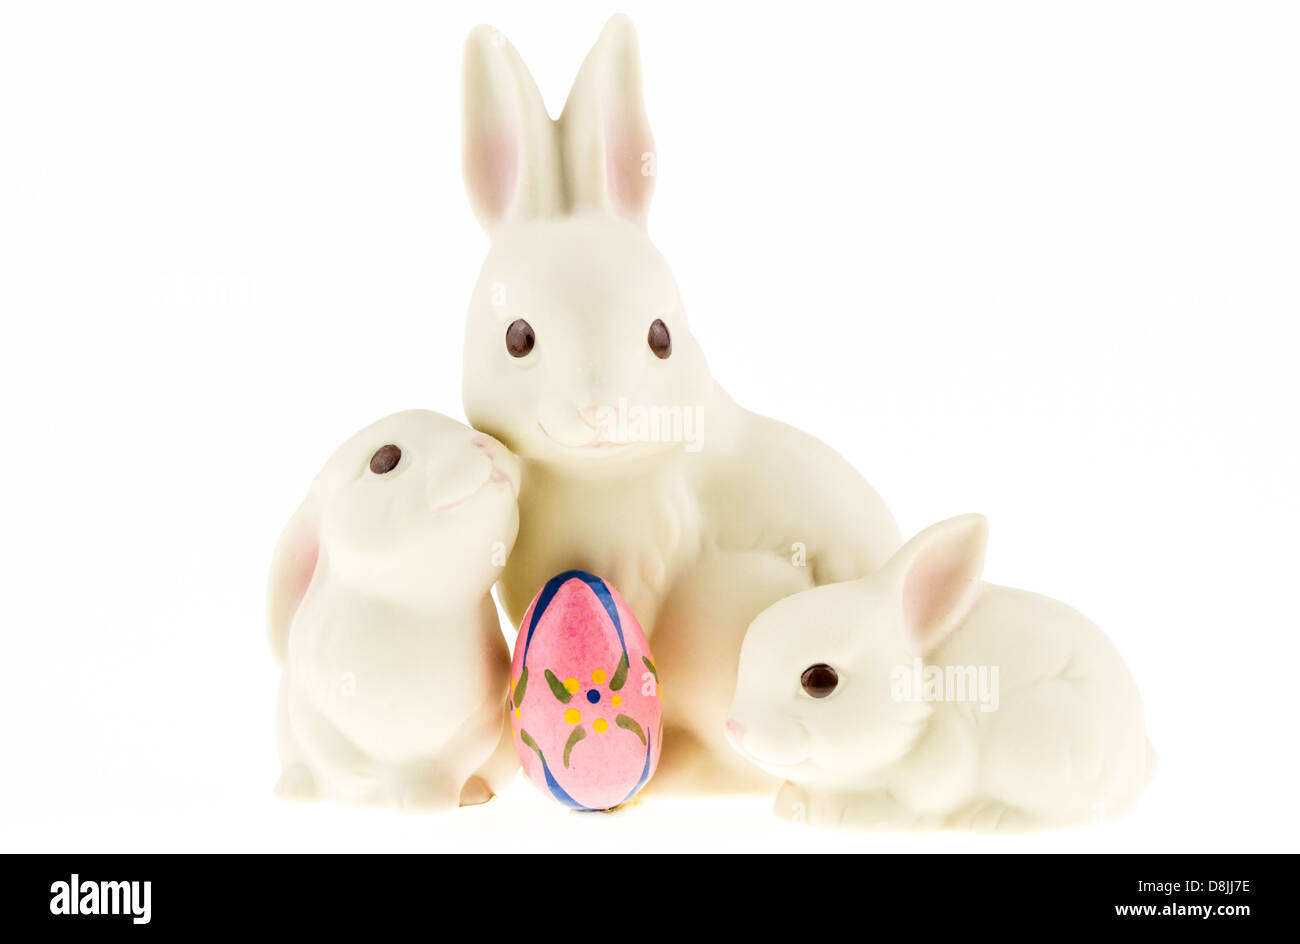 Ceramic bunny trio with an Easter egg isolated against a white background. Stock Photo